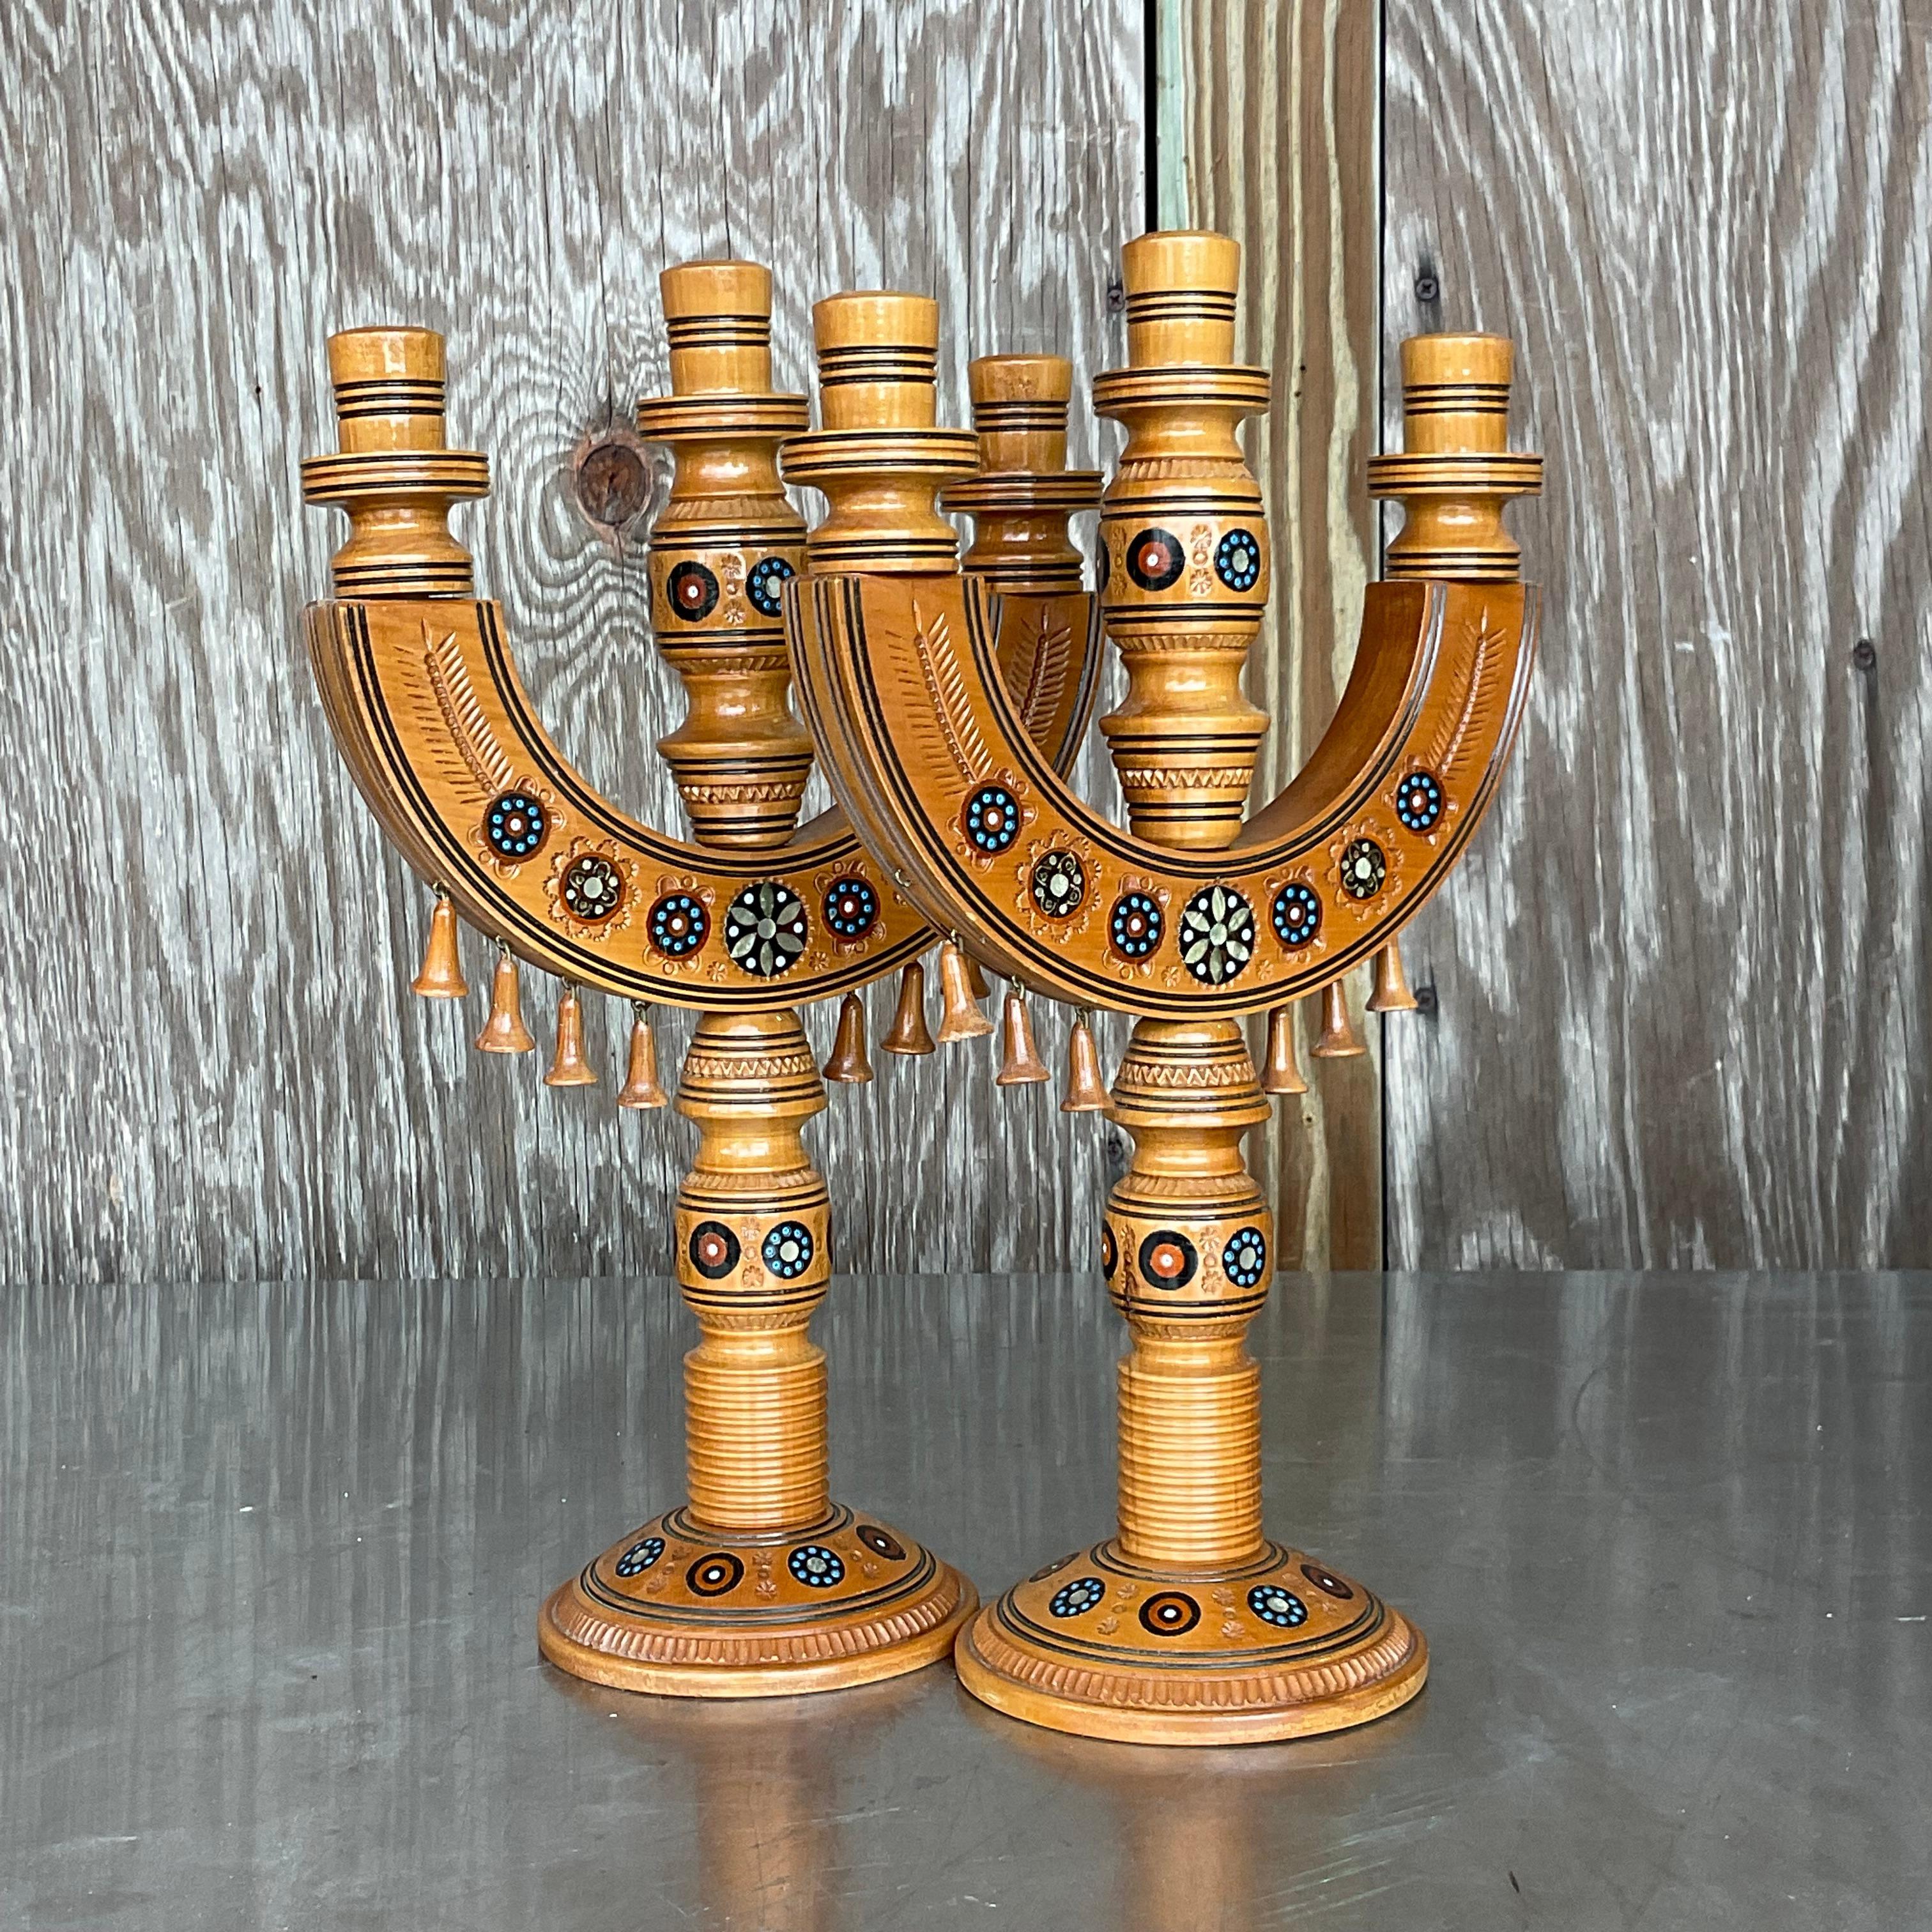 A fabulous pair of vintage Boho Candelabras. Chic hand painted detail on a milled Burl wood frame. Acquired from a Palm Beach estate.